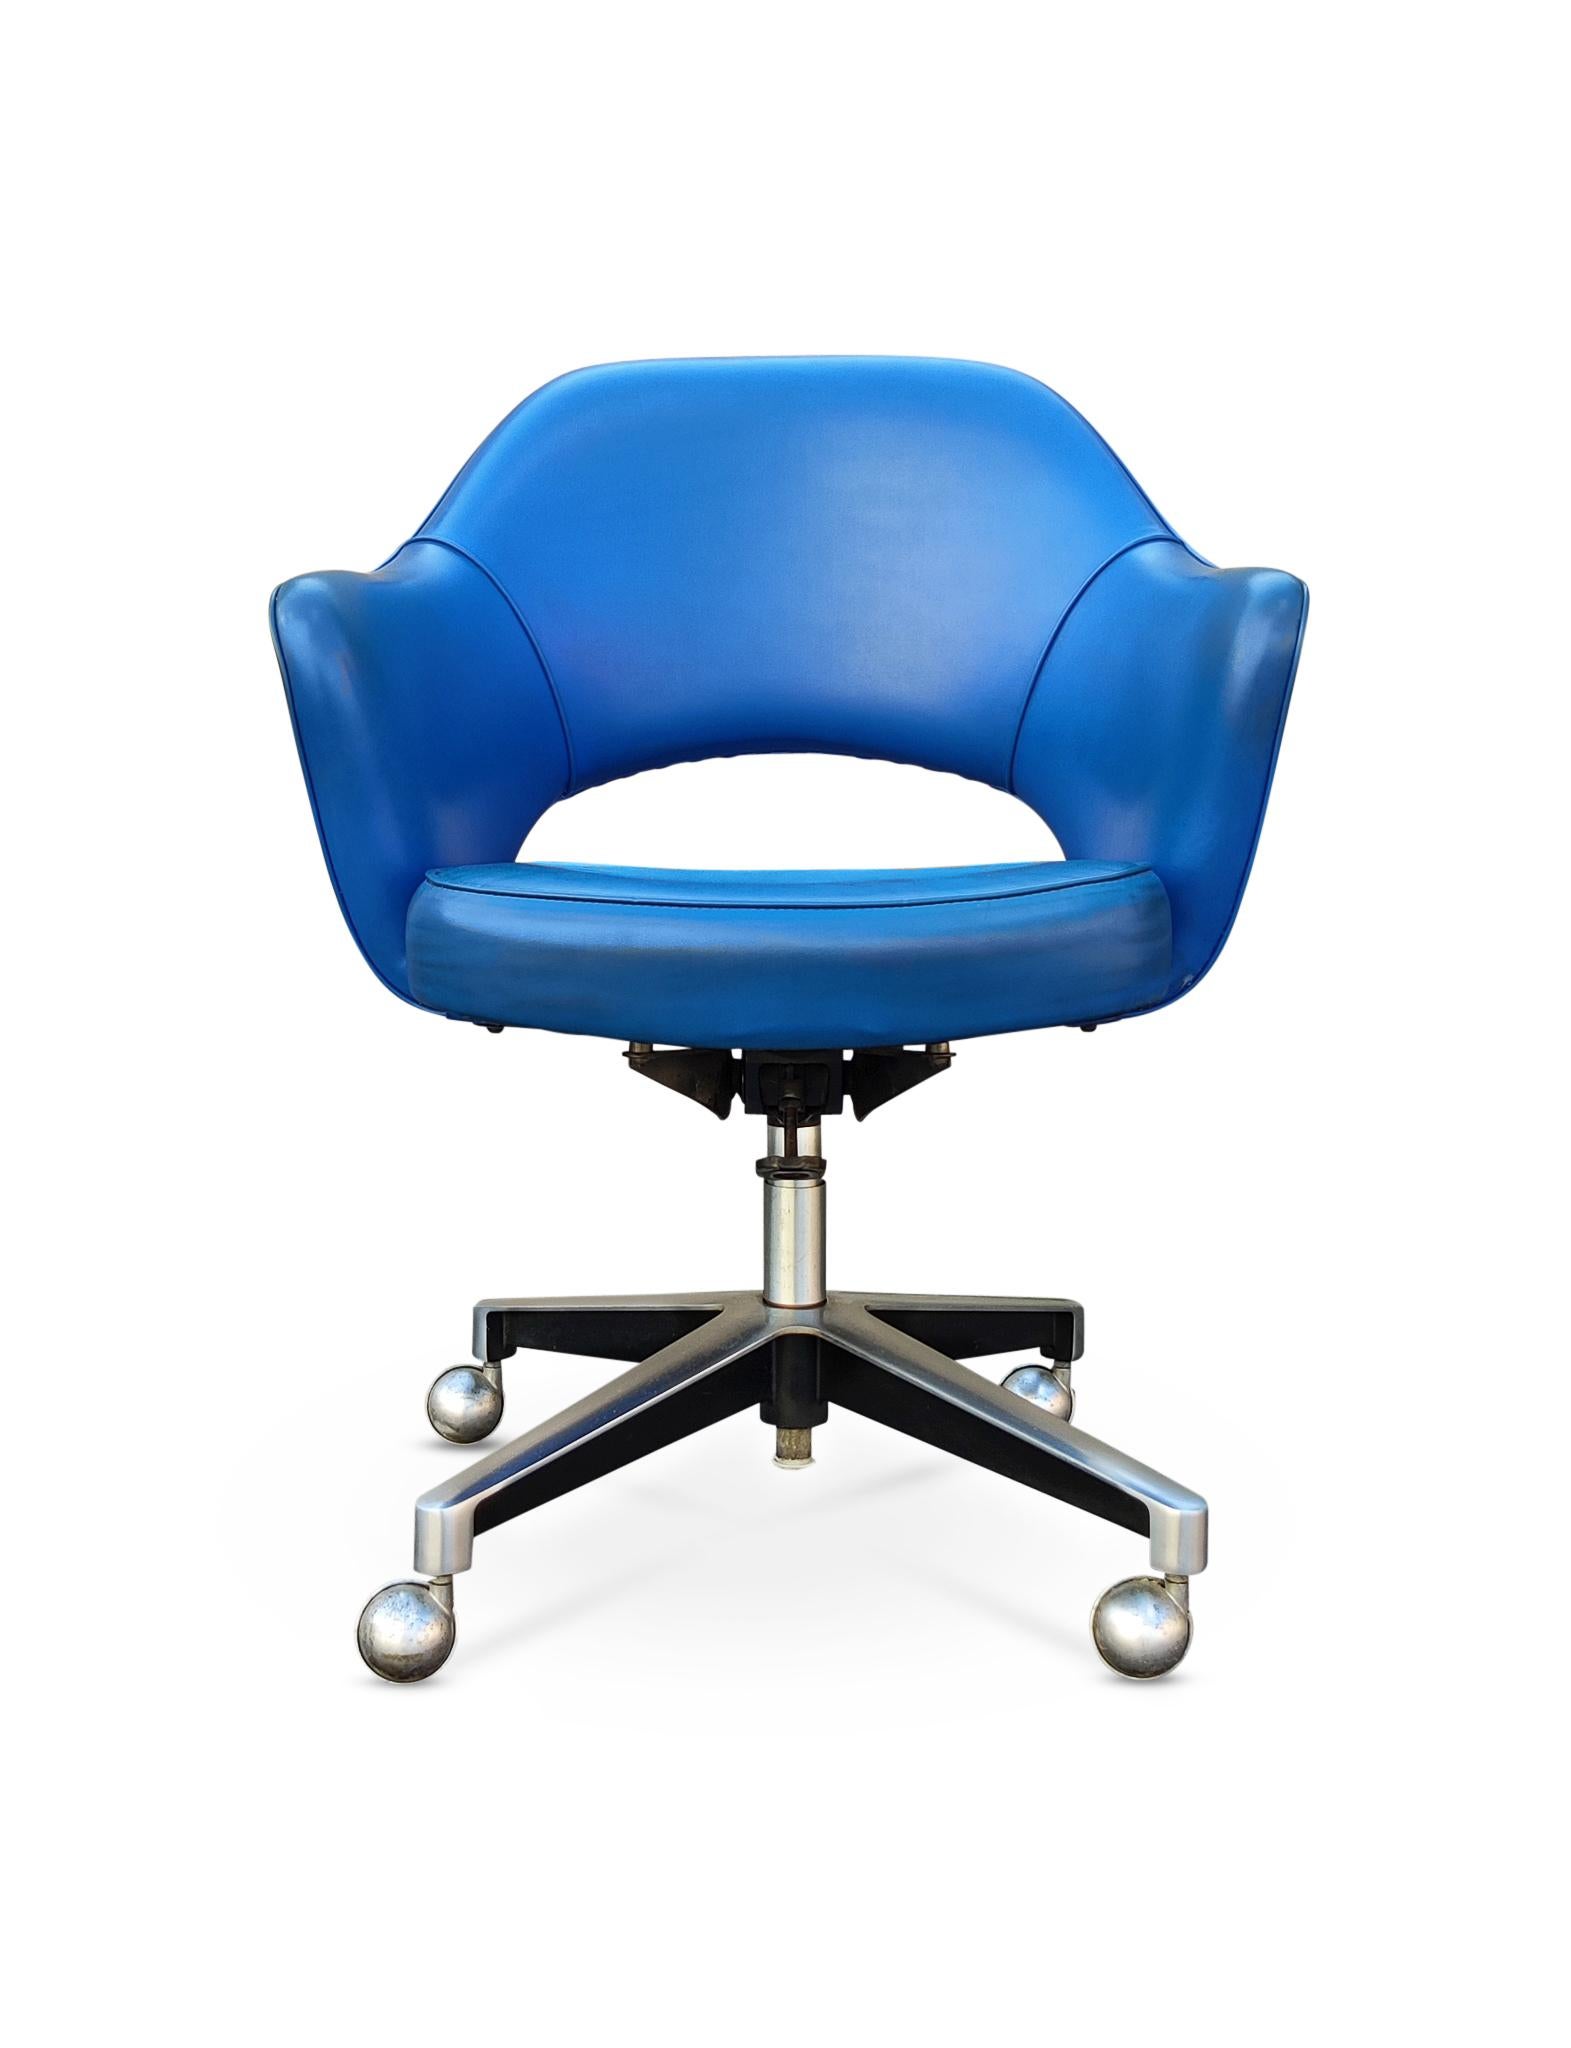 Please note, I have a matching pair of armchairs, see last picture. 

Executive armchair designed in 1950 by Eero Saarinen for Knoll Associates. This example is from the early '50's, with the earliest tilt mechanism. All original! The original blue